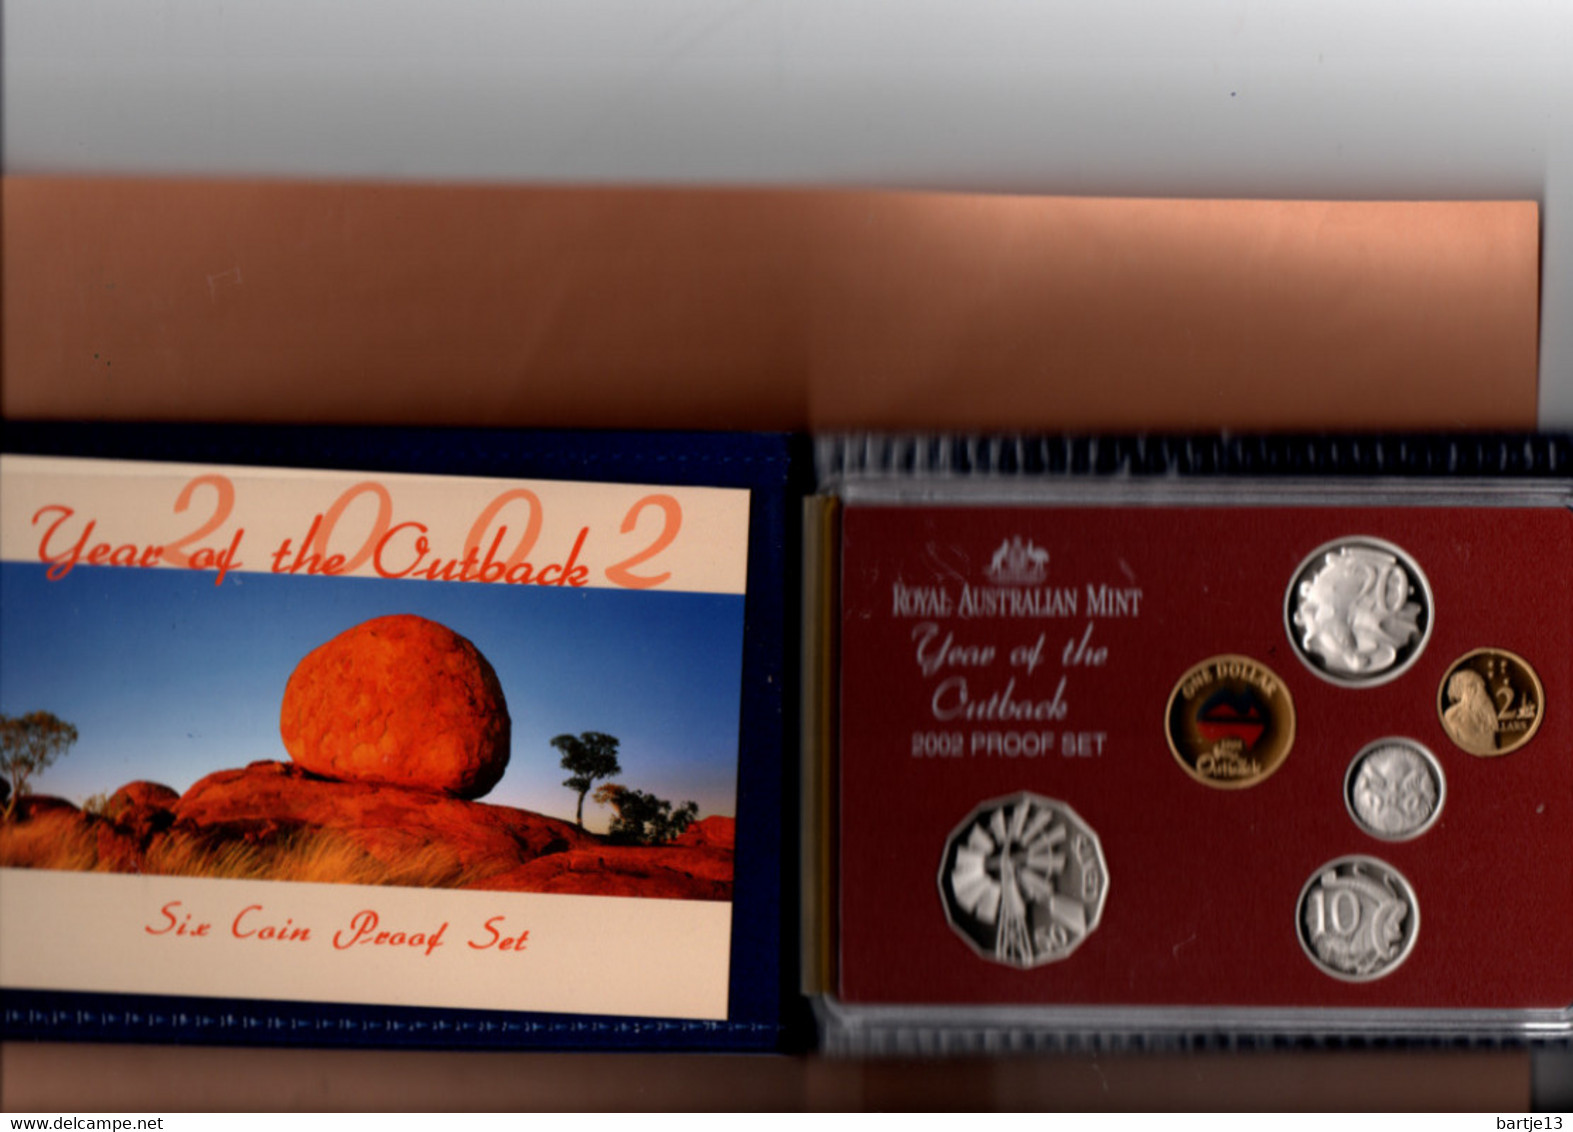 AUSTRALIE YEAR OF THE OUTBACK PROOFSET 2002 KRAUSE PS119 - Mint Sets & Proof Sets